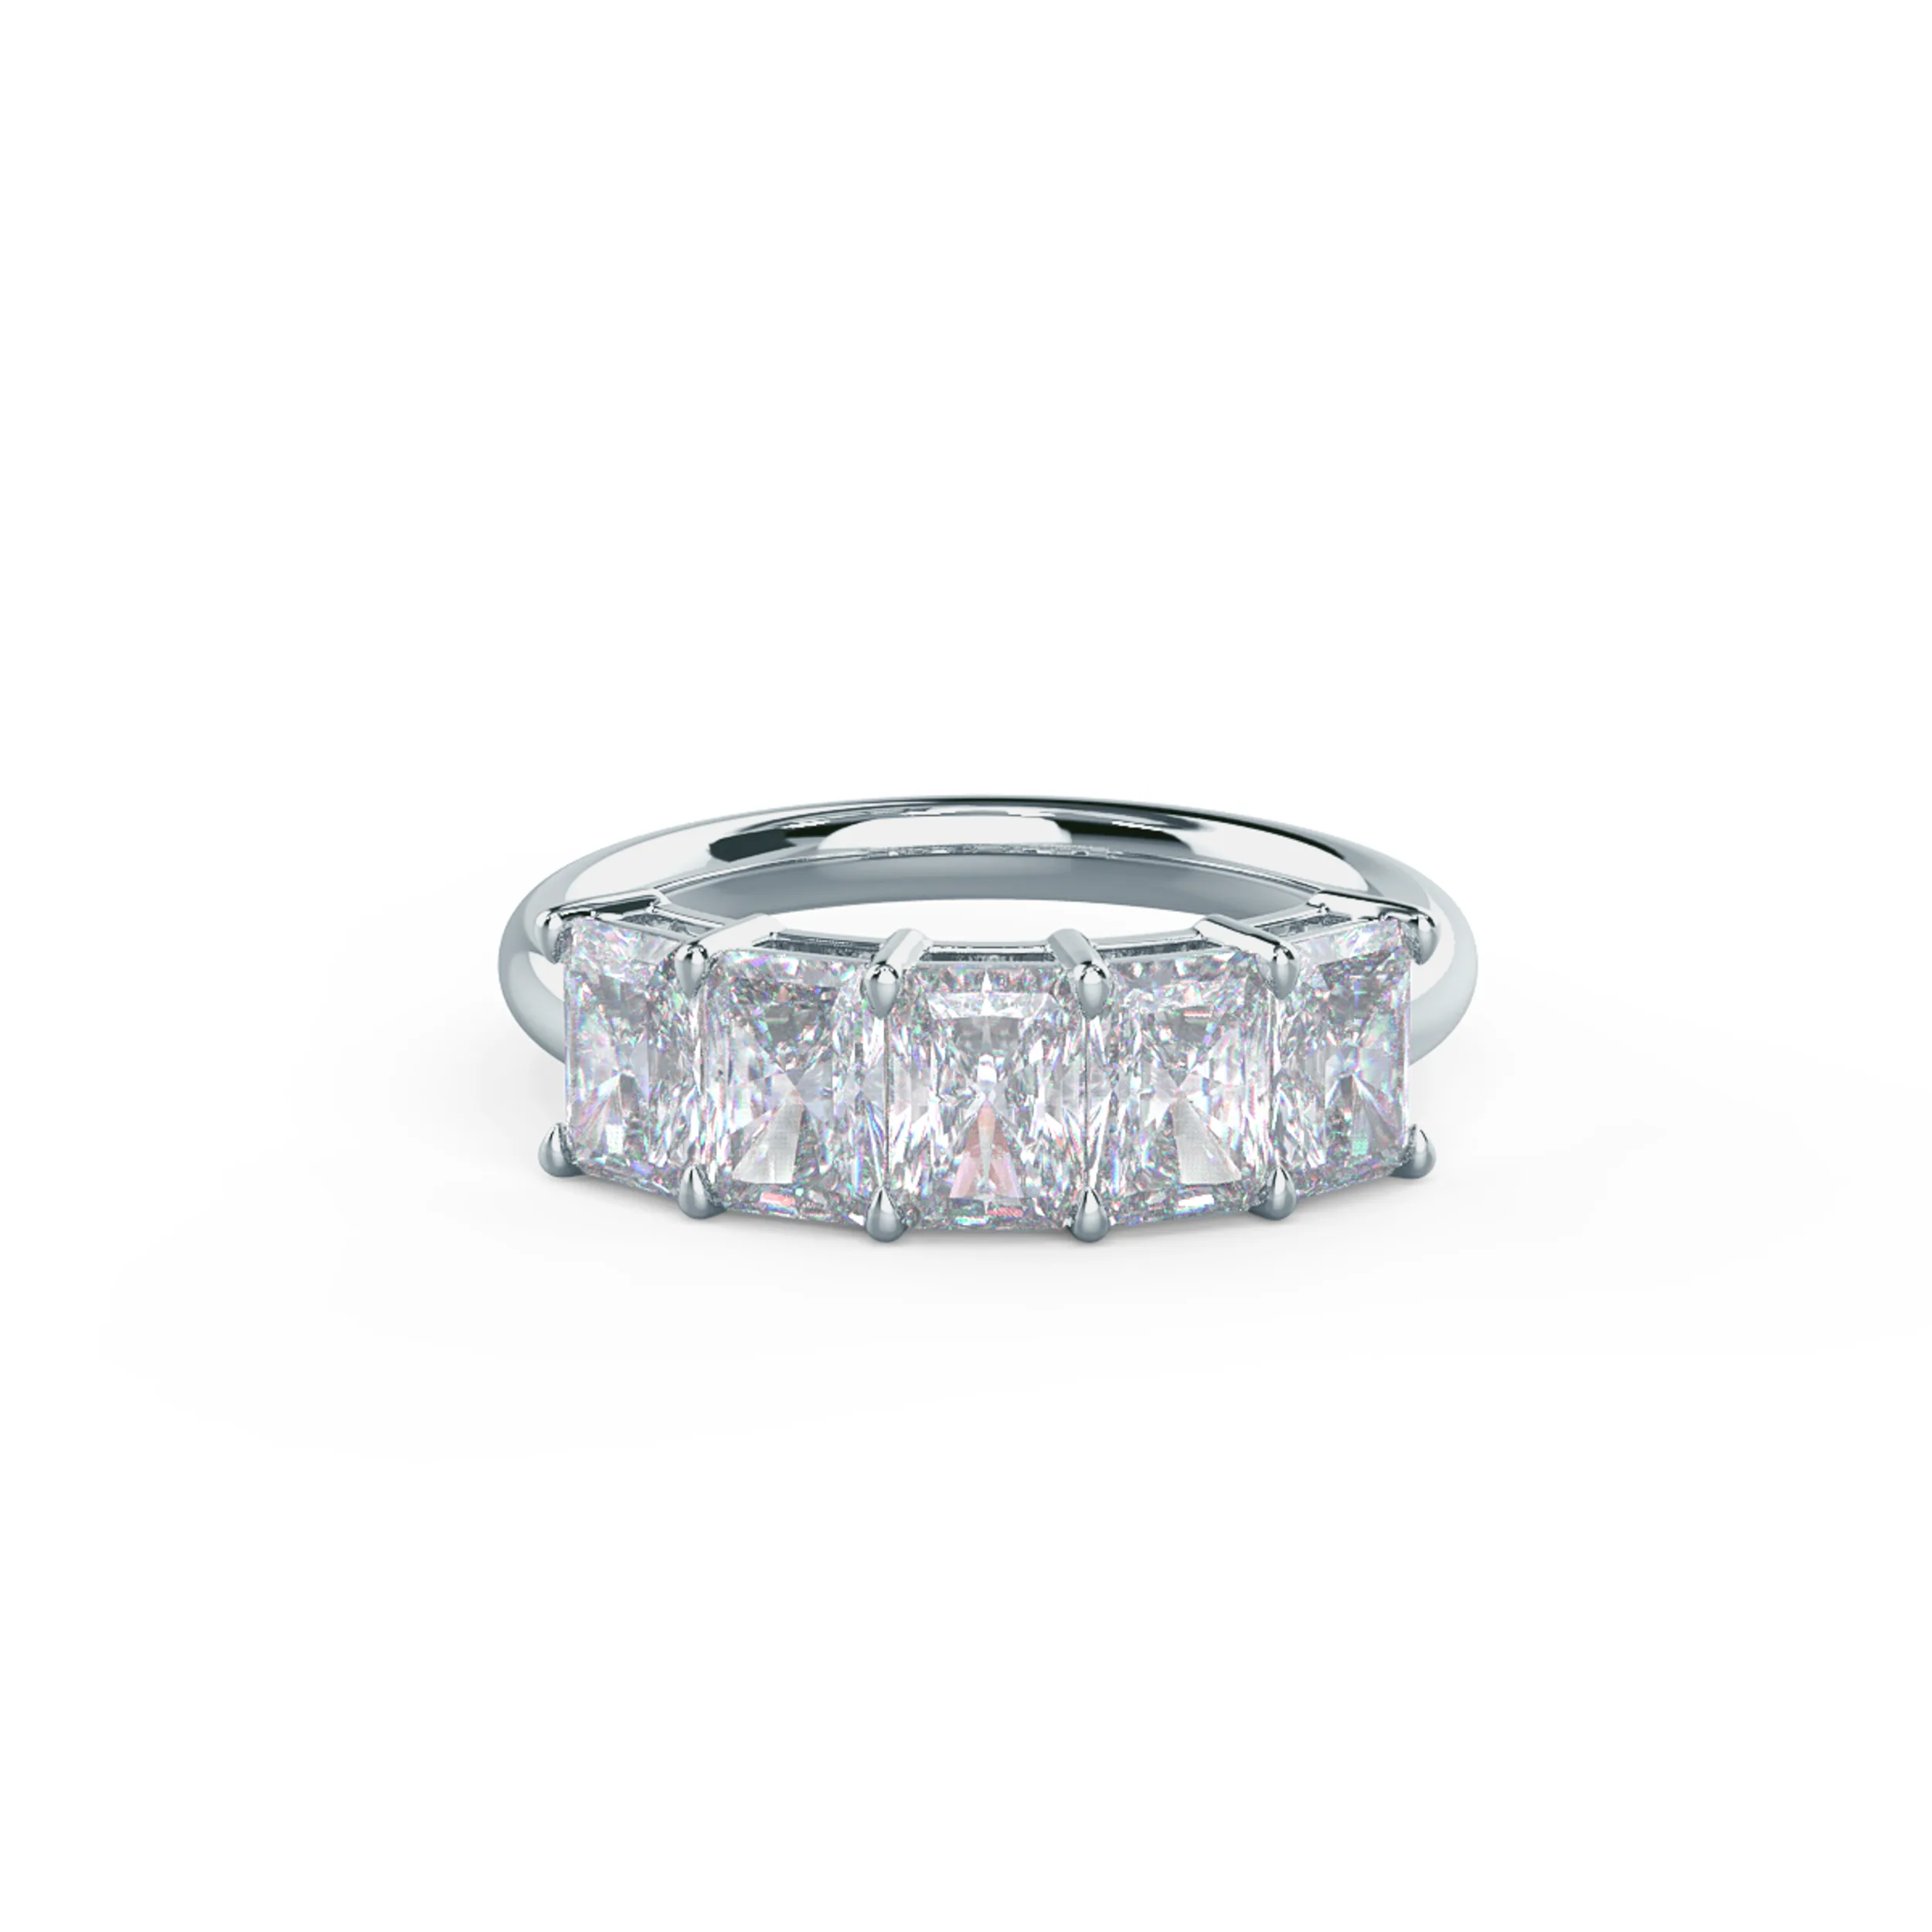 2.0 Carat Lab Created Diamonds set in 18k White Gold Radiant Five Stone (Main View)